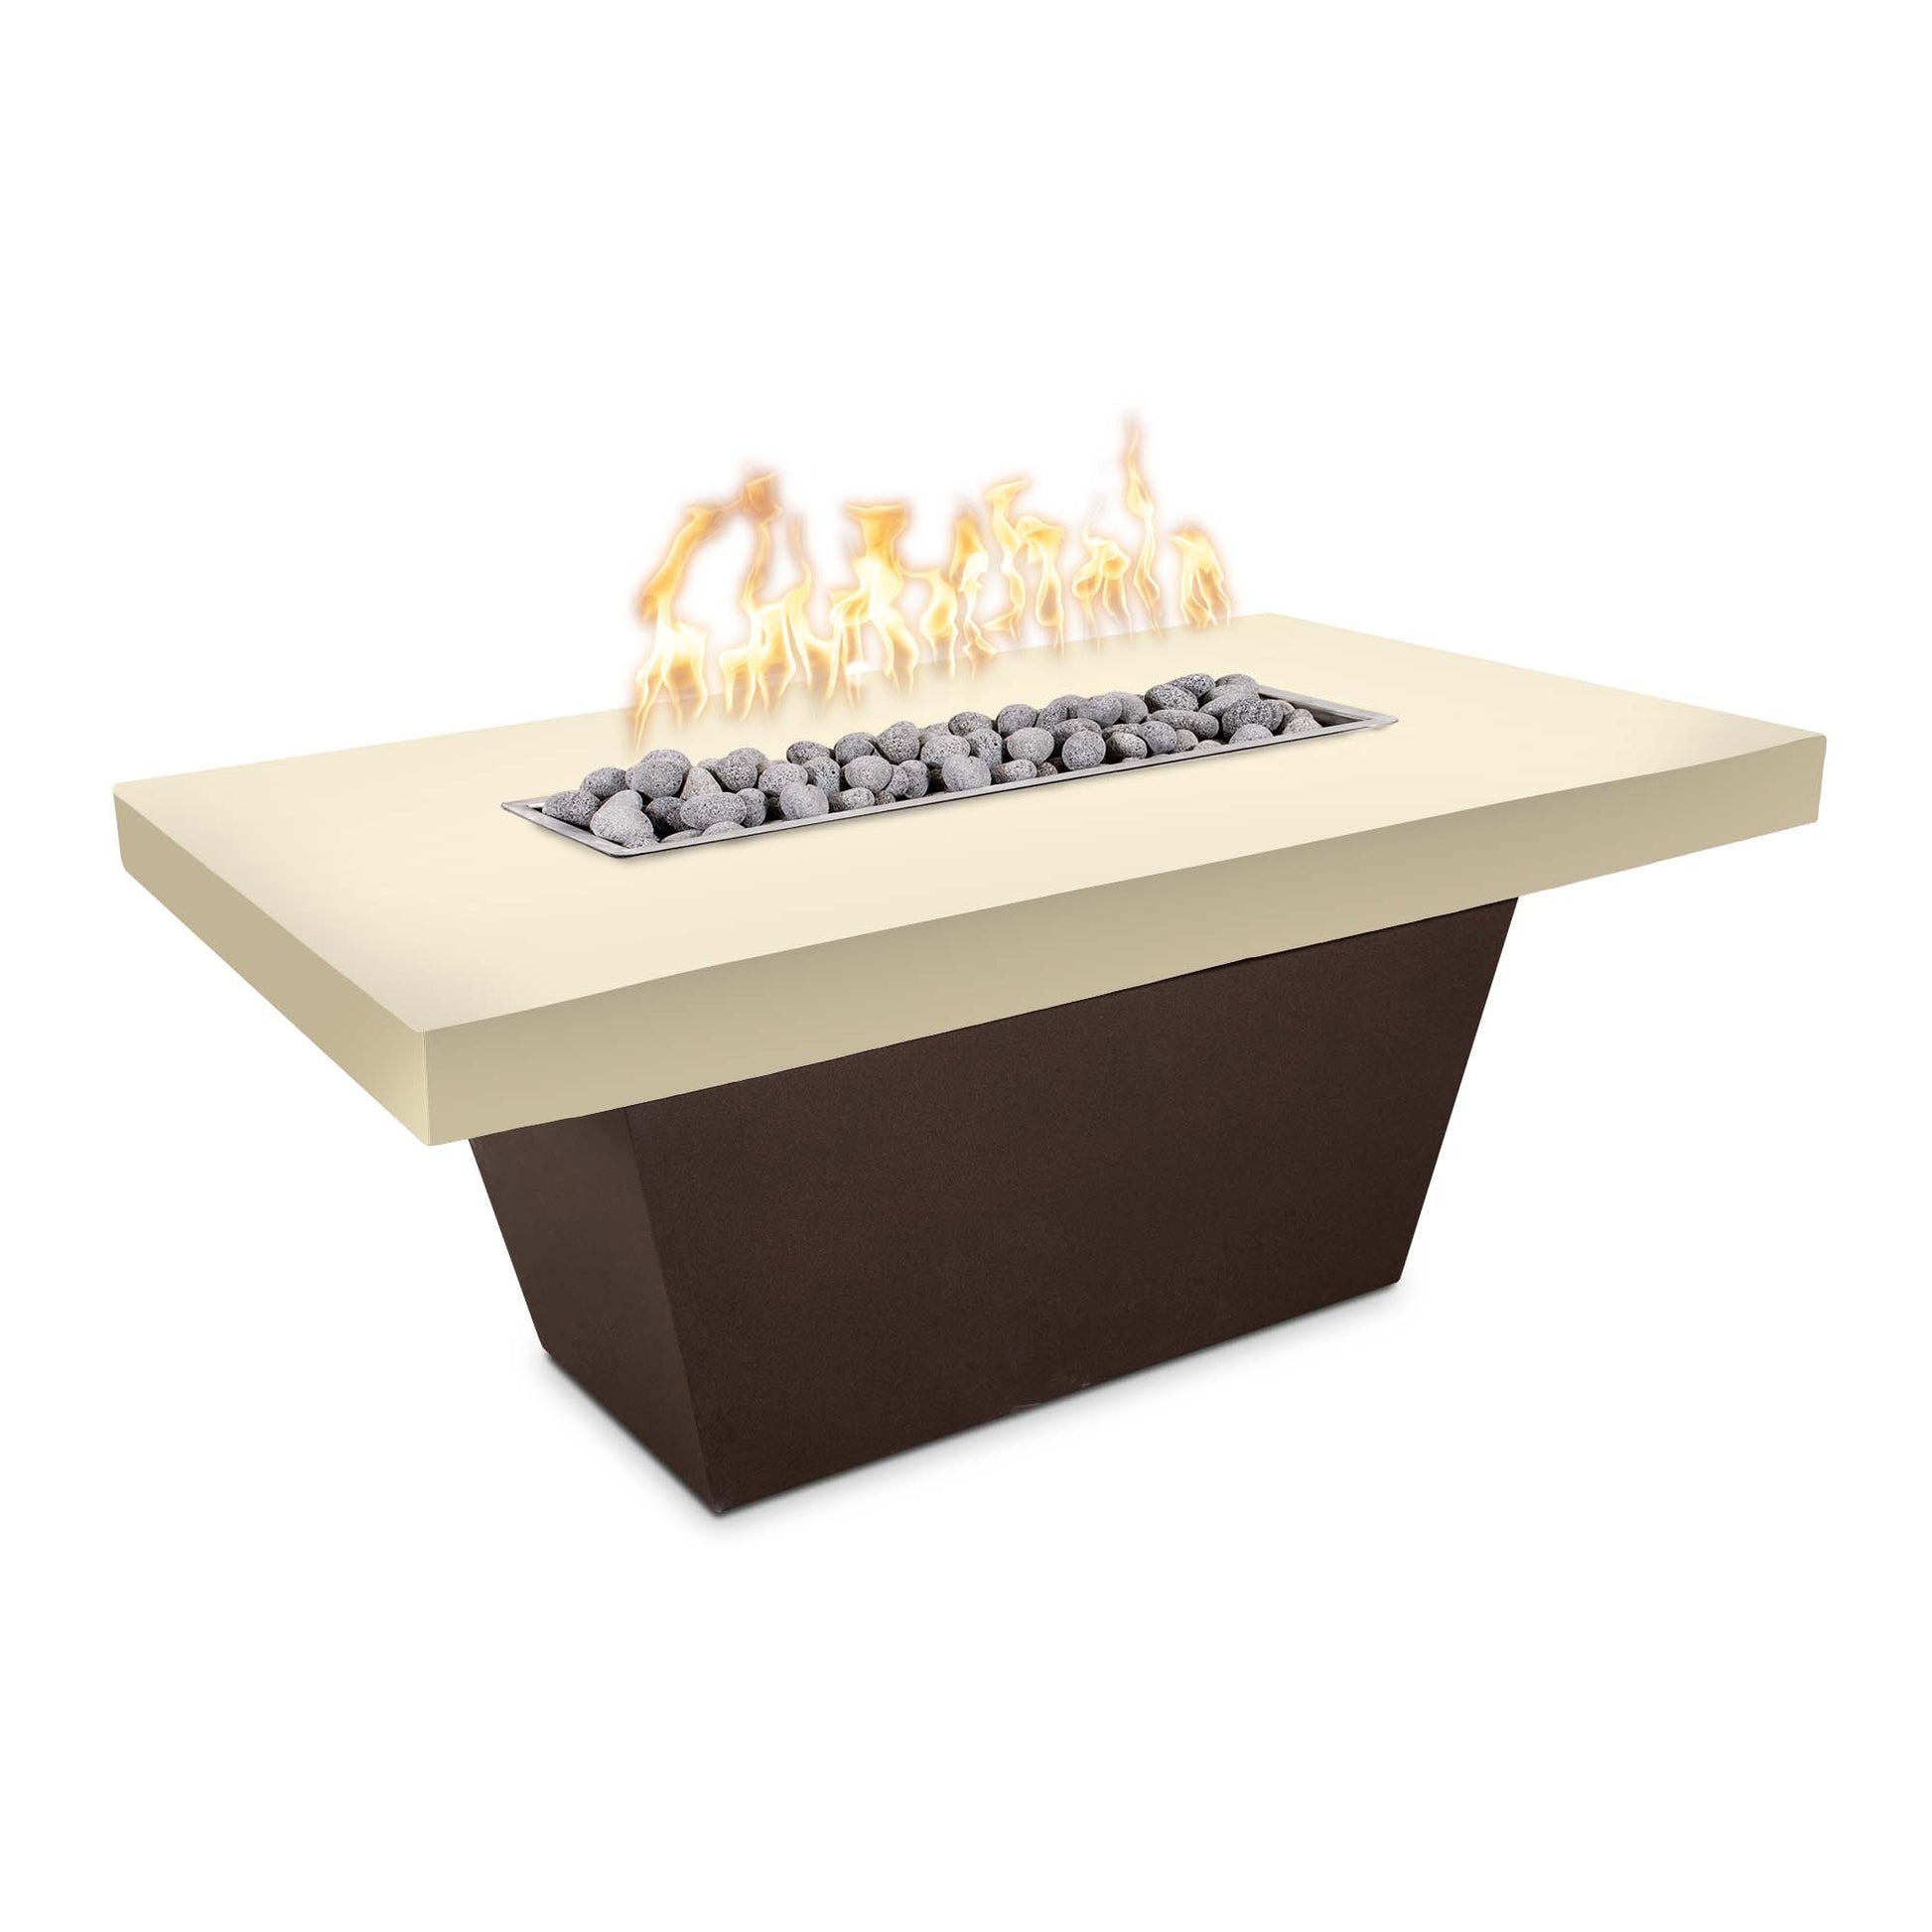 The Outdoor Plus Tacoma 48" Rustic Gray Concrete Top & White Powder Coated Base Natural Gas Fire Table with Match Lit Ignition